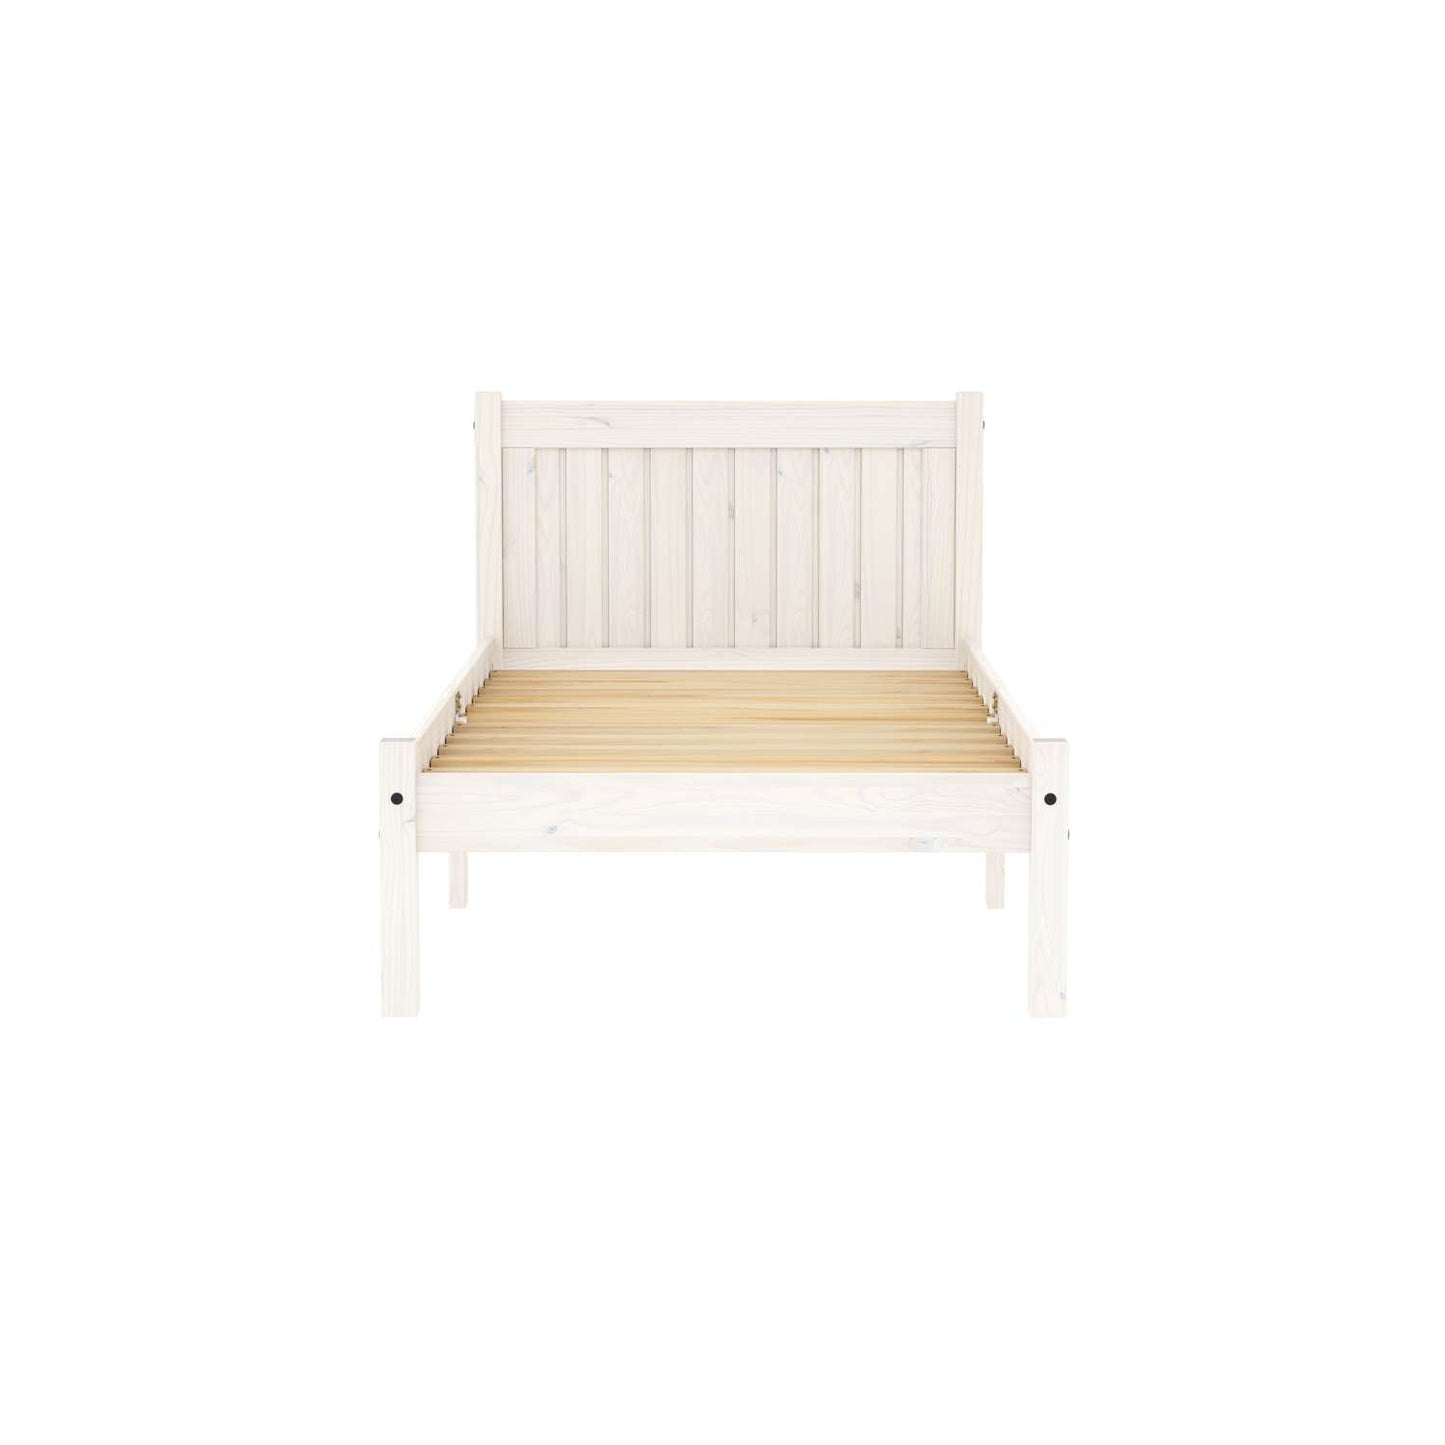 Rio White Washed Bed Frame